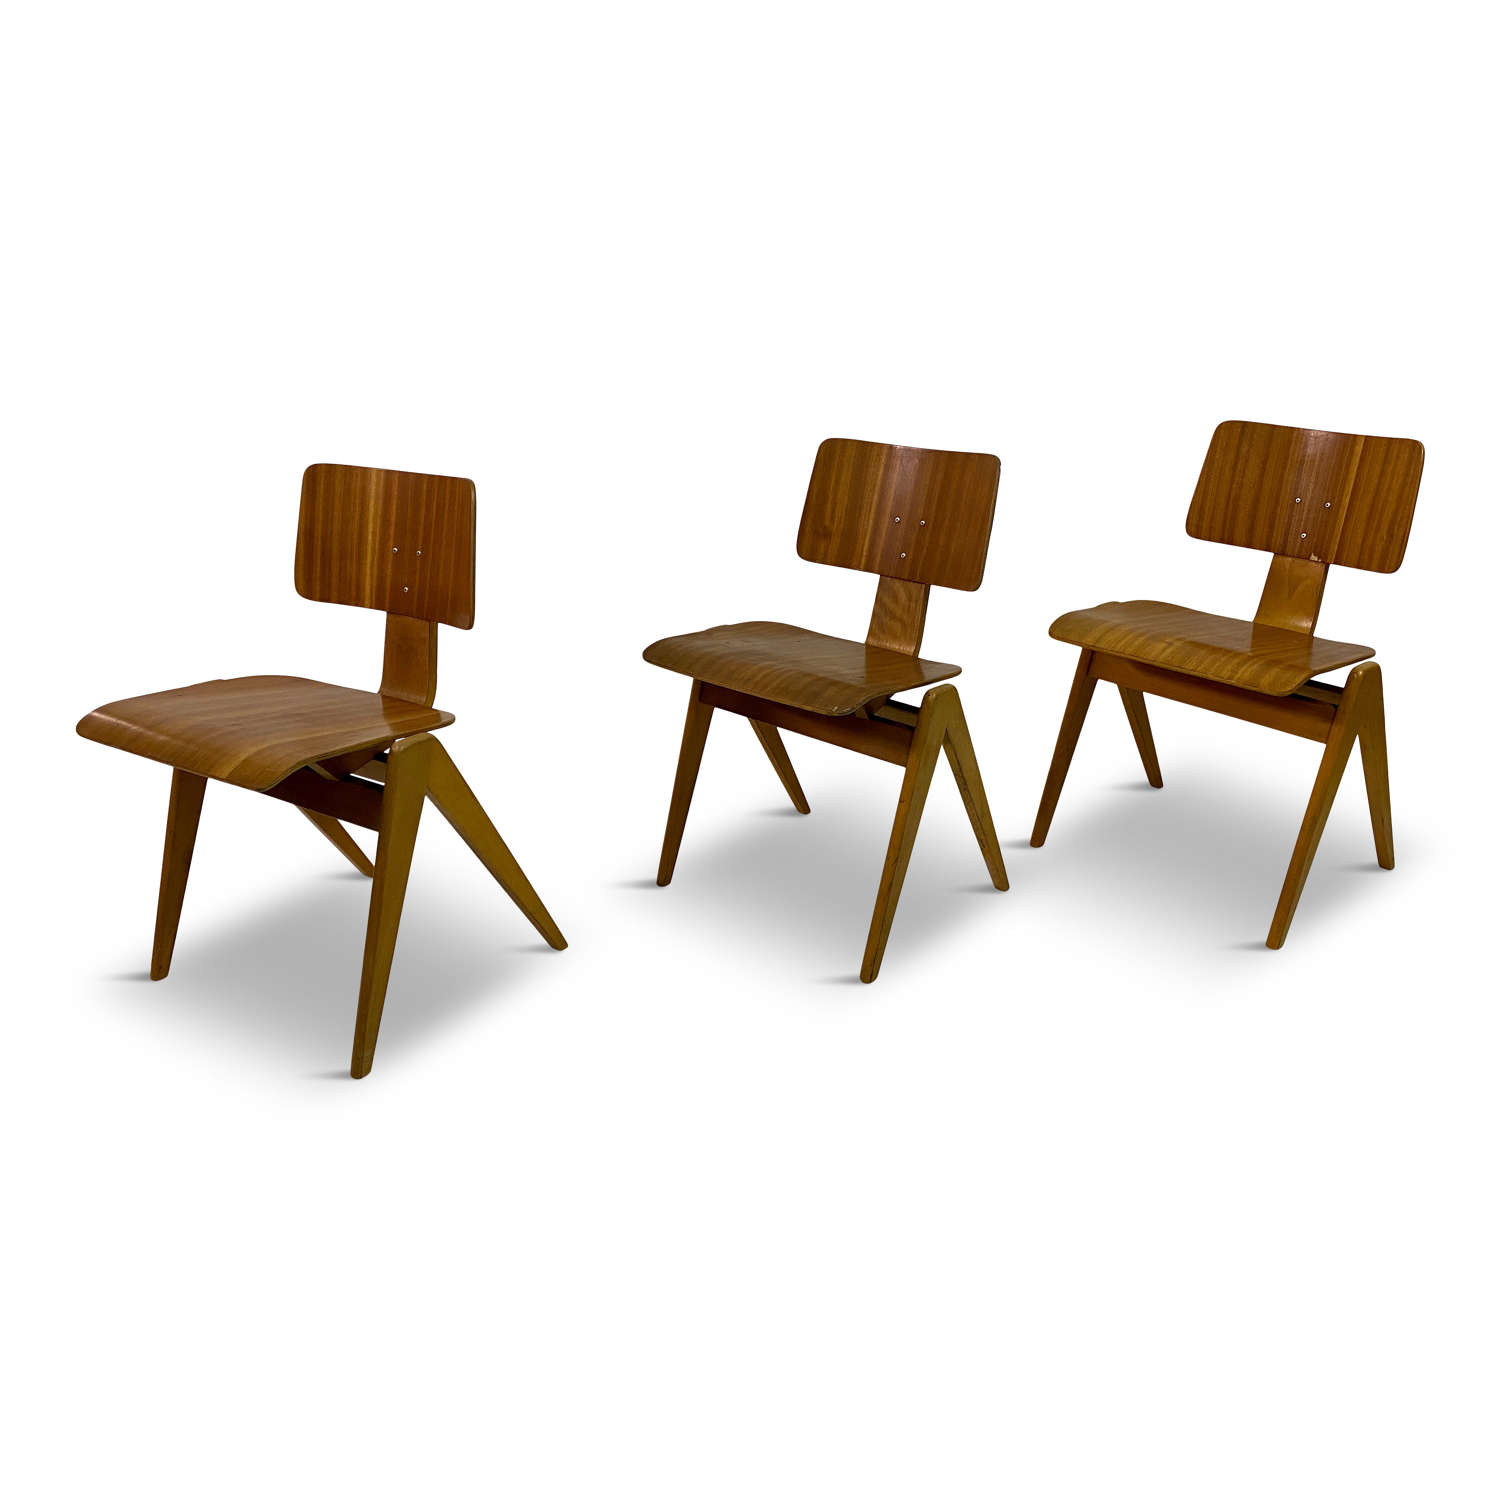 Set of Three Hillestak Chairs by Robin Day